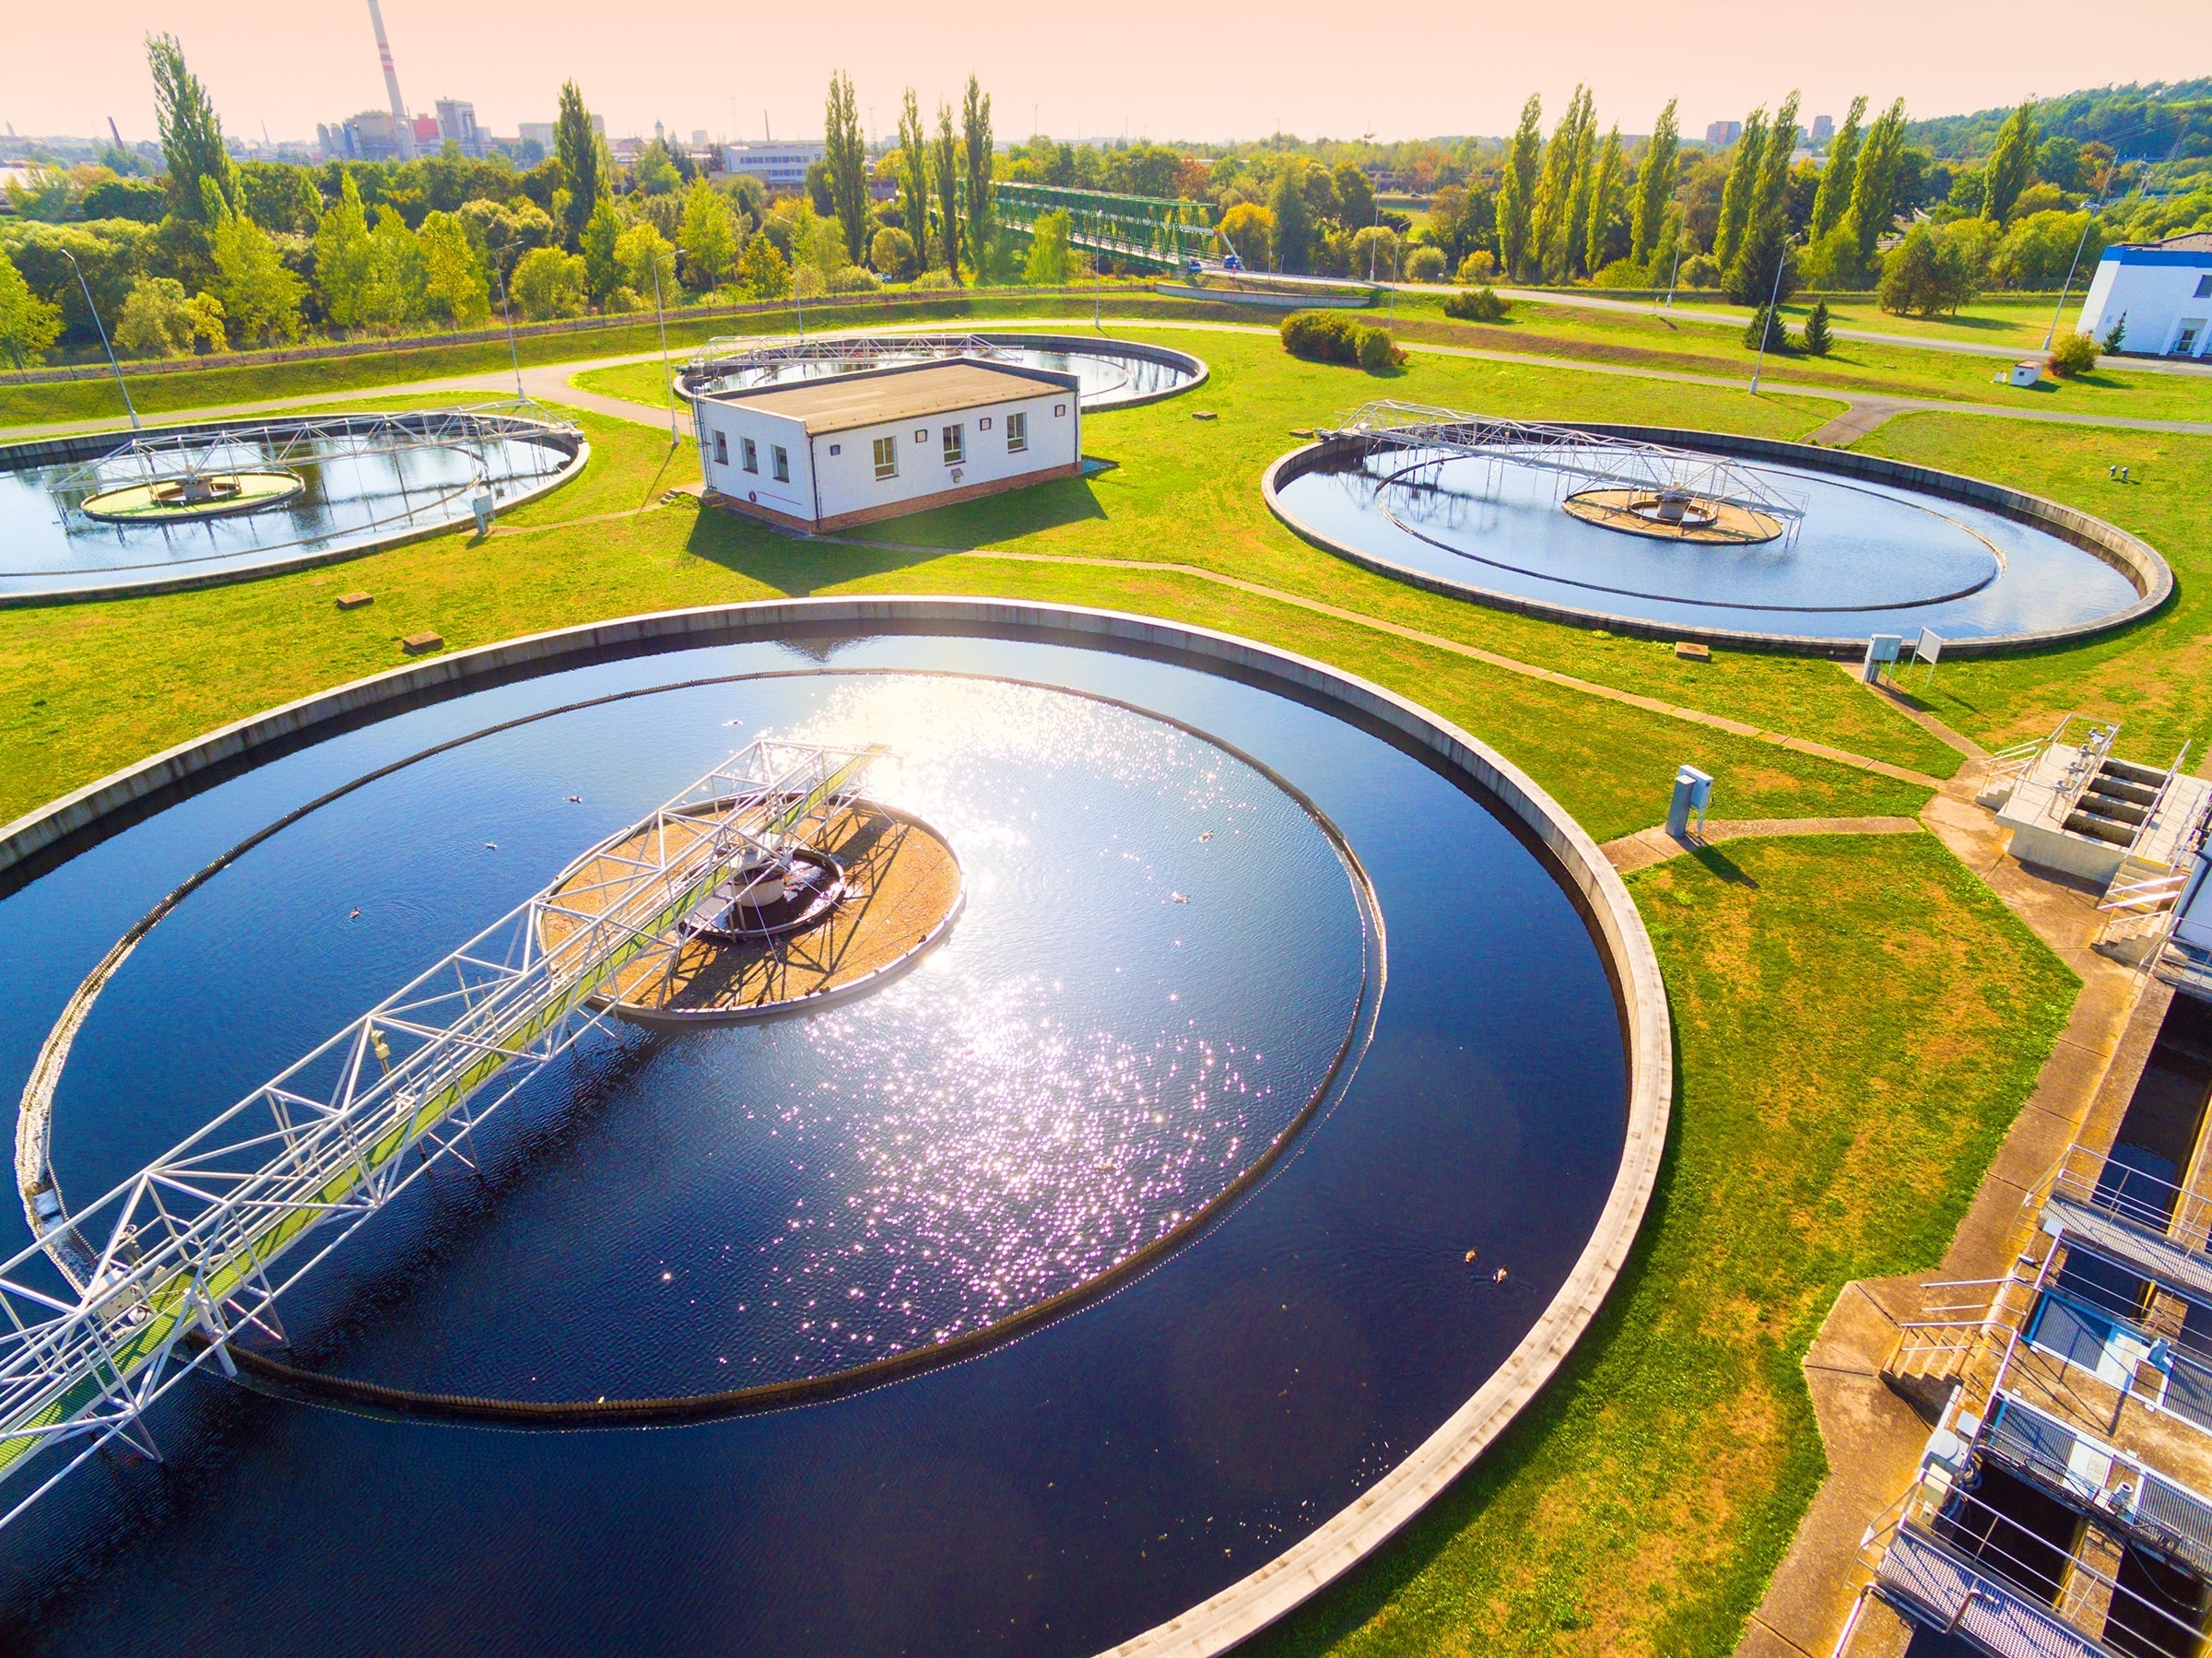 More than 70% of the world has no wastewater treatment